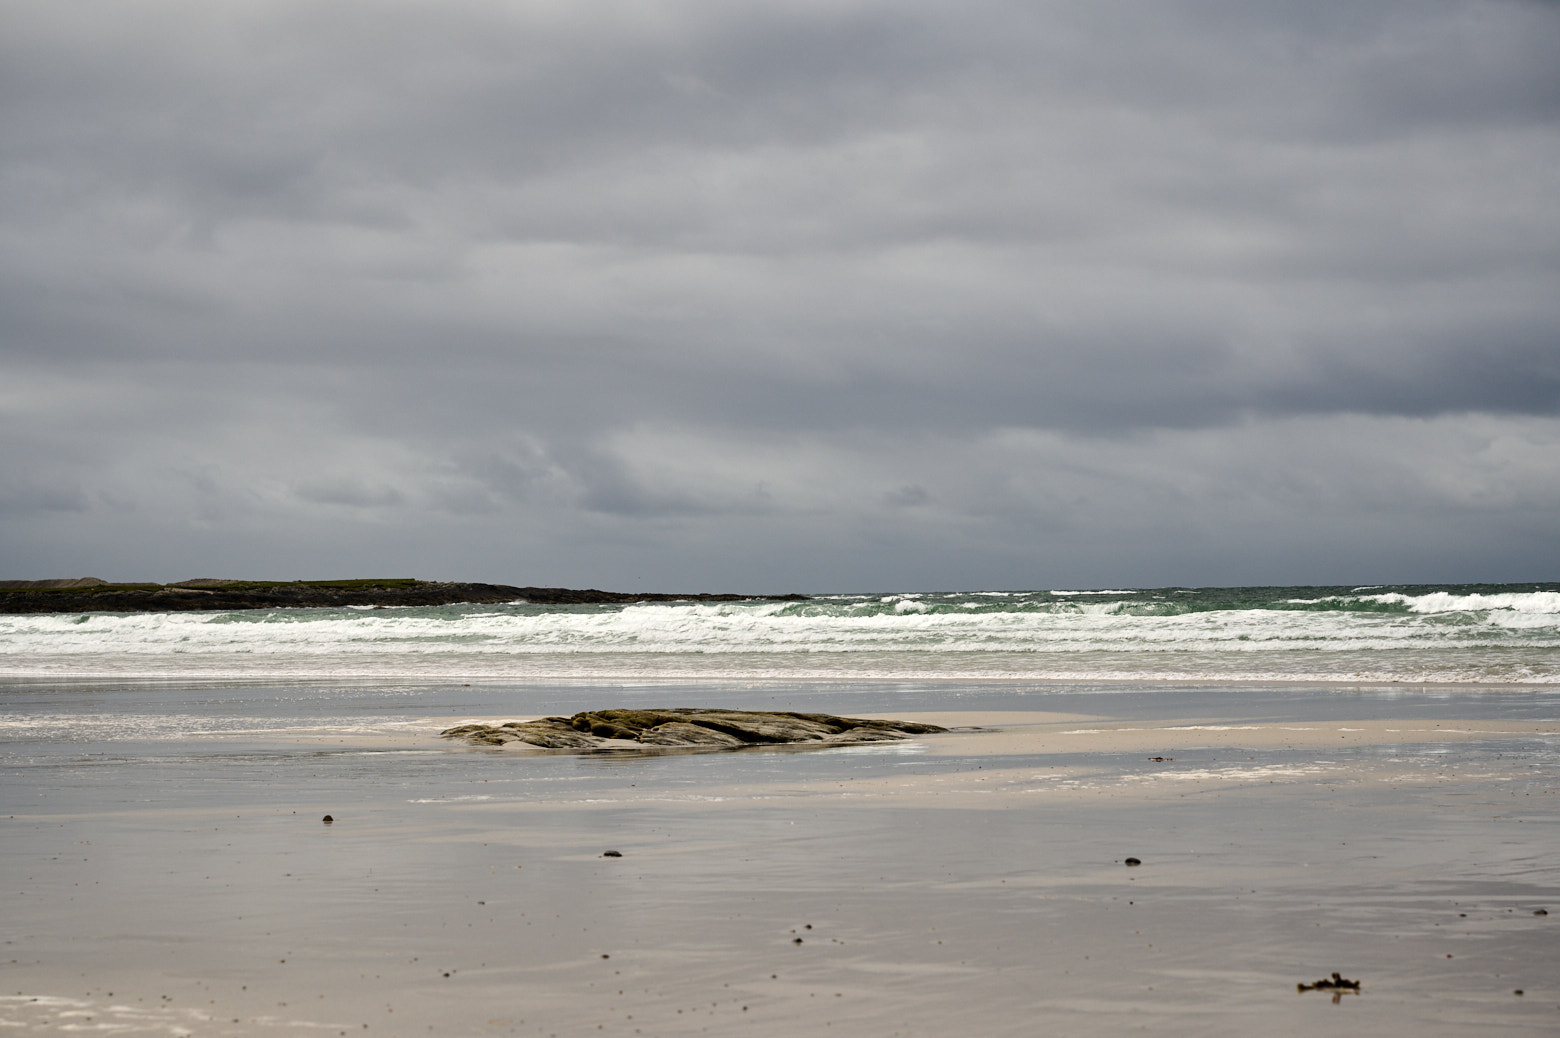 First view of Benbecula and Cula Bay, Outer Hebrides